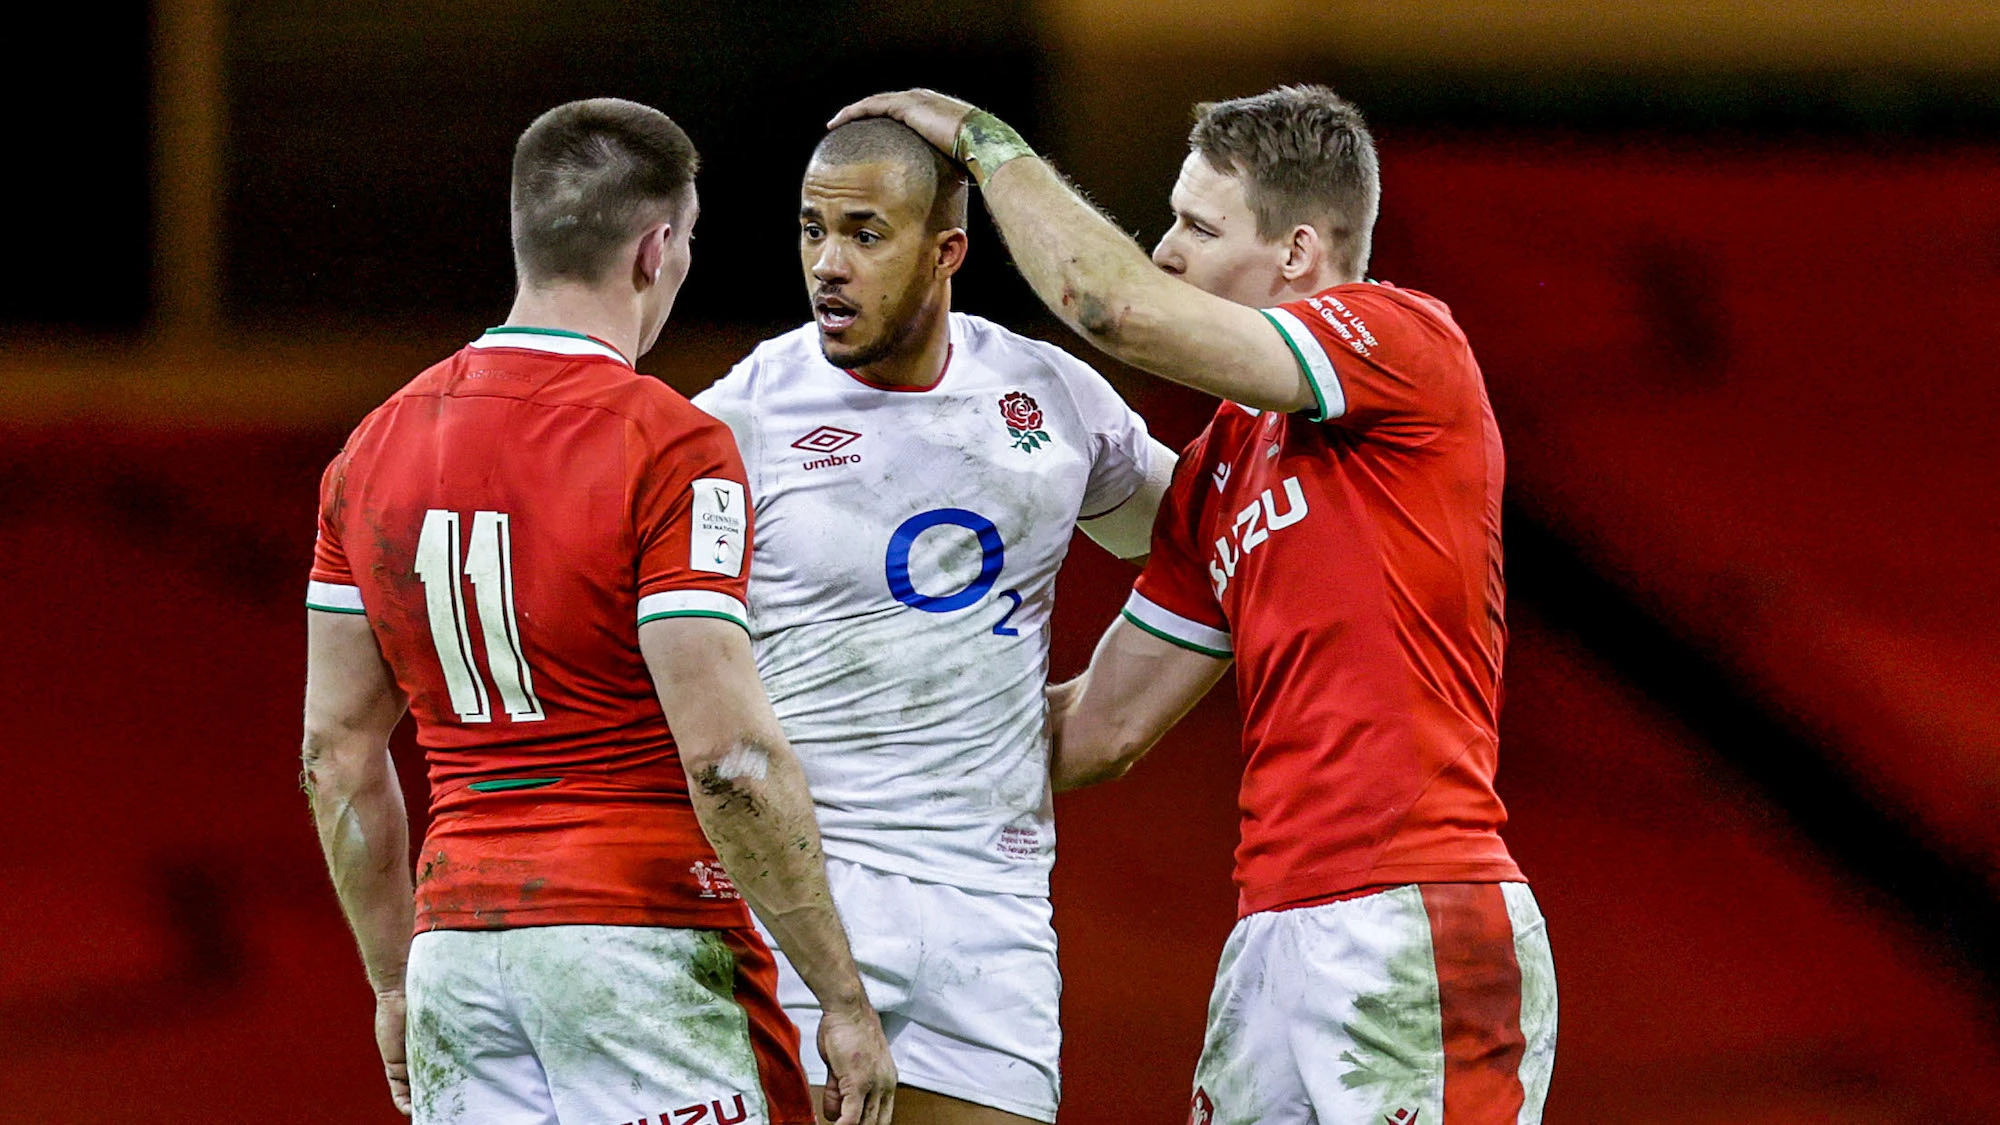 Josh Adams and Liam Williams with Anthony Watson after the game 27/2/2021